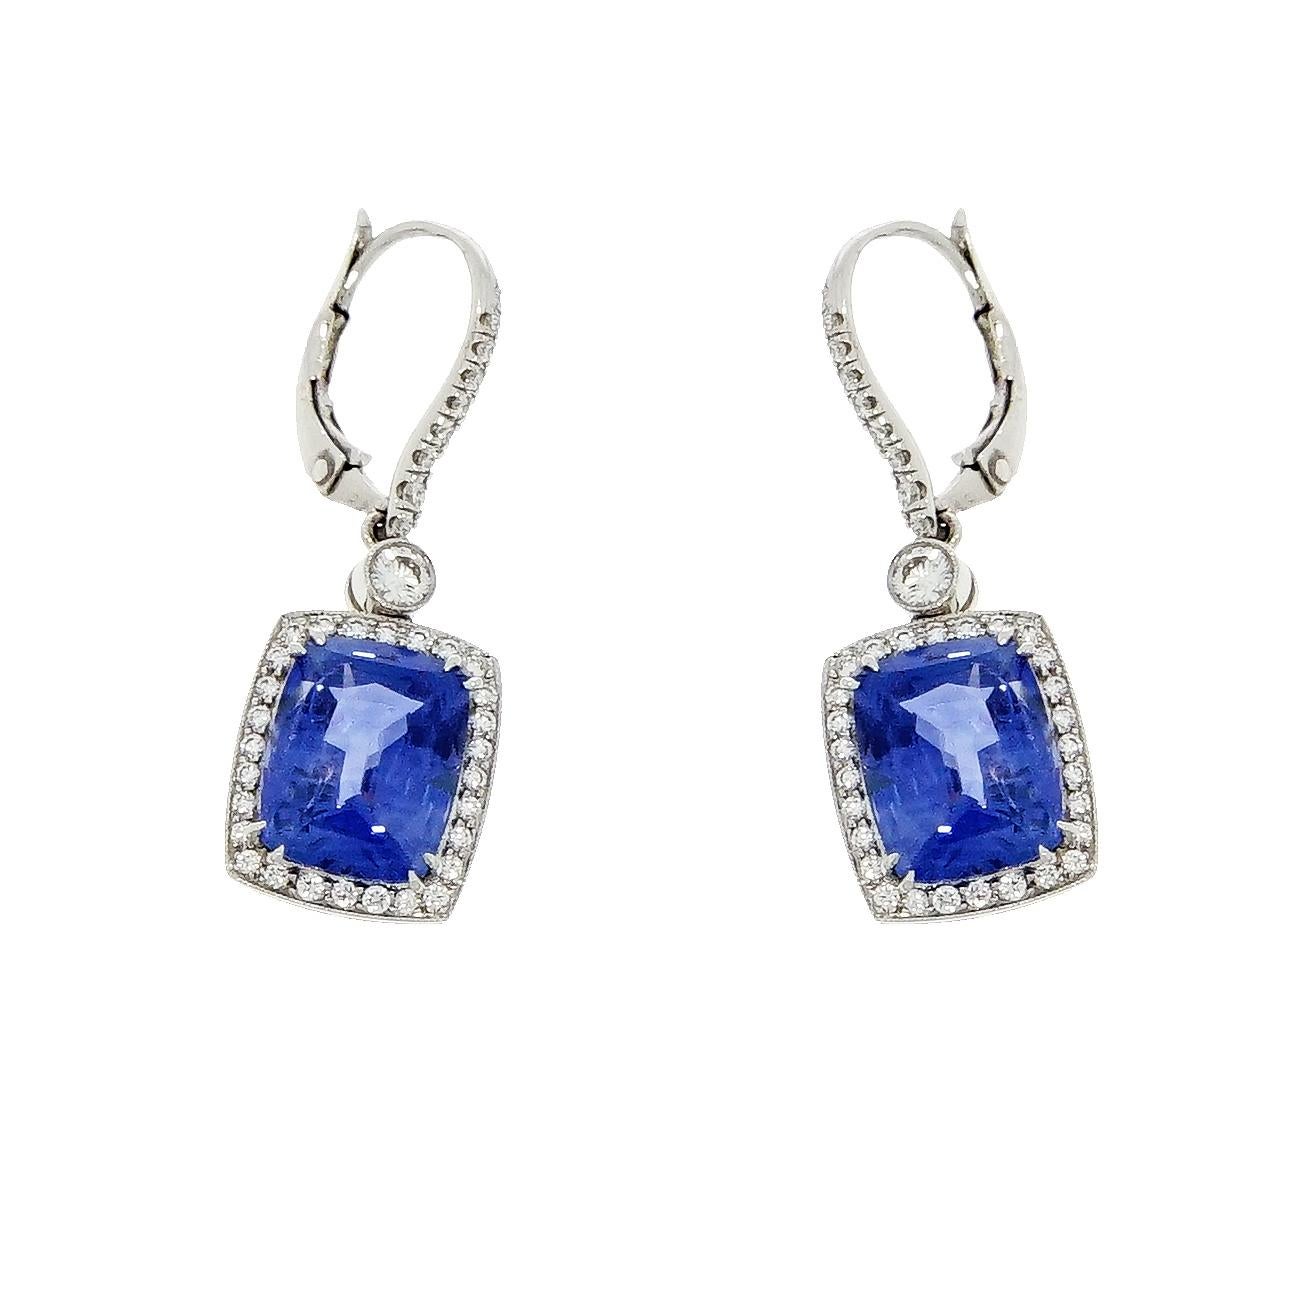 Stunning drop earrings consisting of 2 cushion cut unheated Ceylon sapphires having a total weight of 10.69 carats (5.01carat and 5.68 carat respectively), surrounded by a single row of 56 round brilliant cut diamond halo, weighing 1.56 carats.